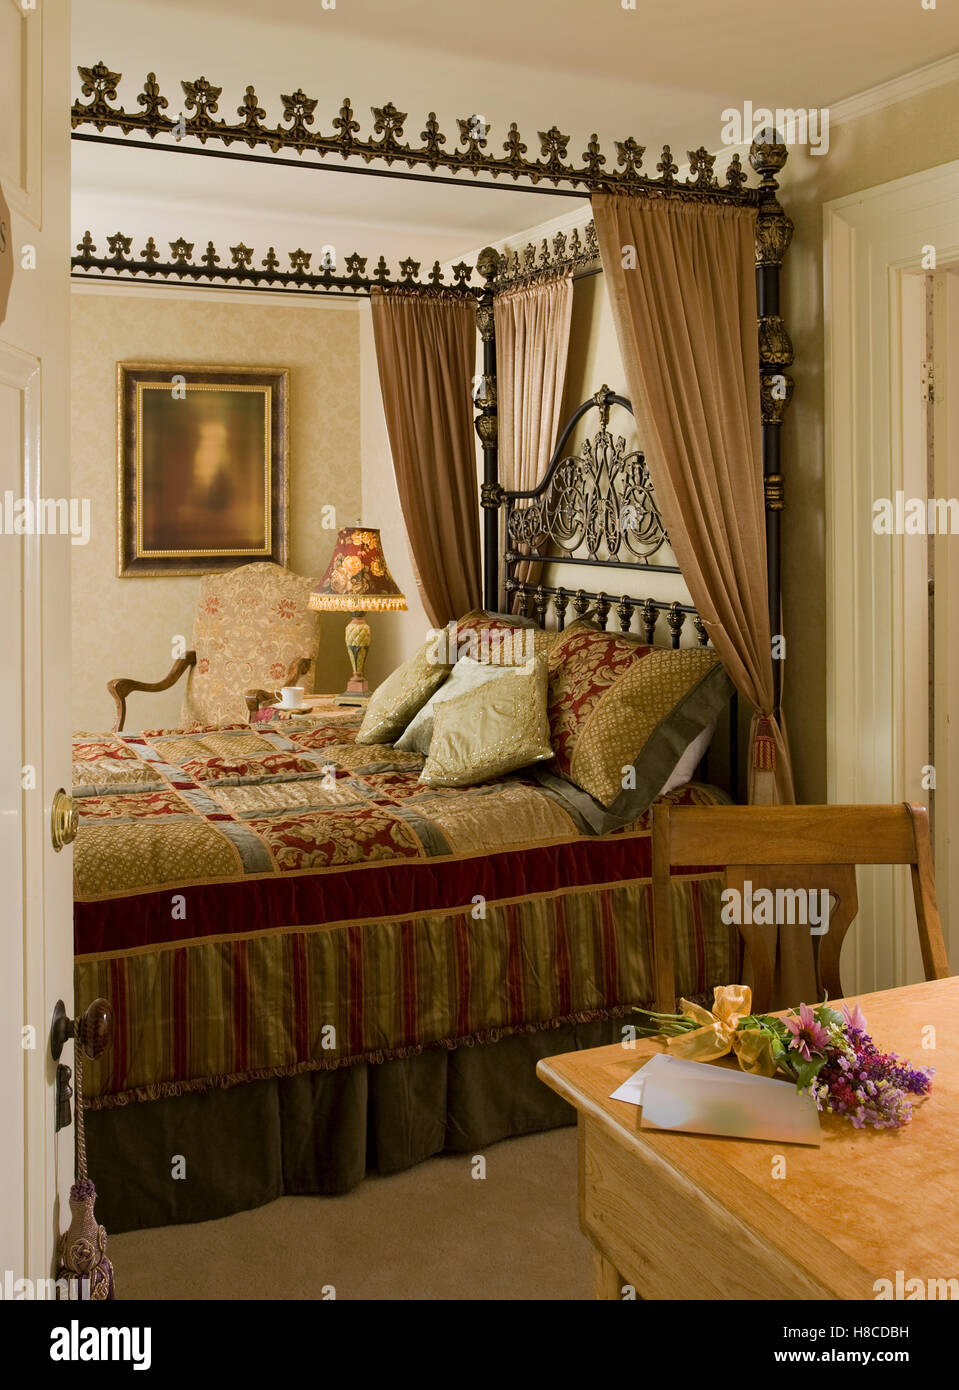 Ornate four poster bed with curtains Stock Photo - Alamy